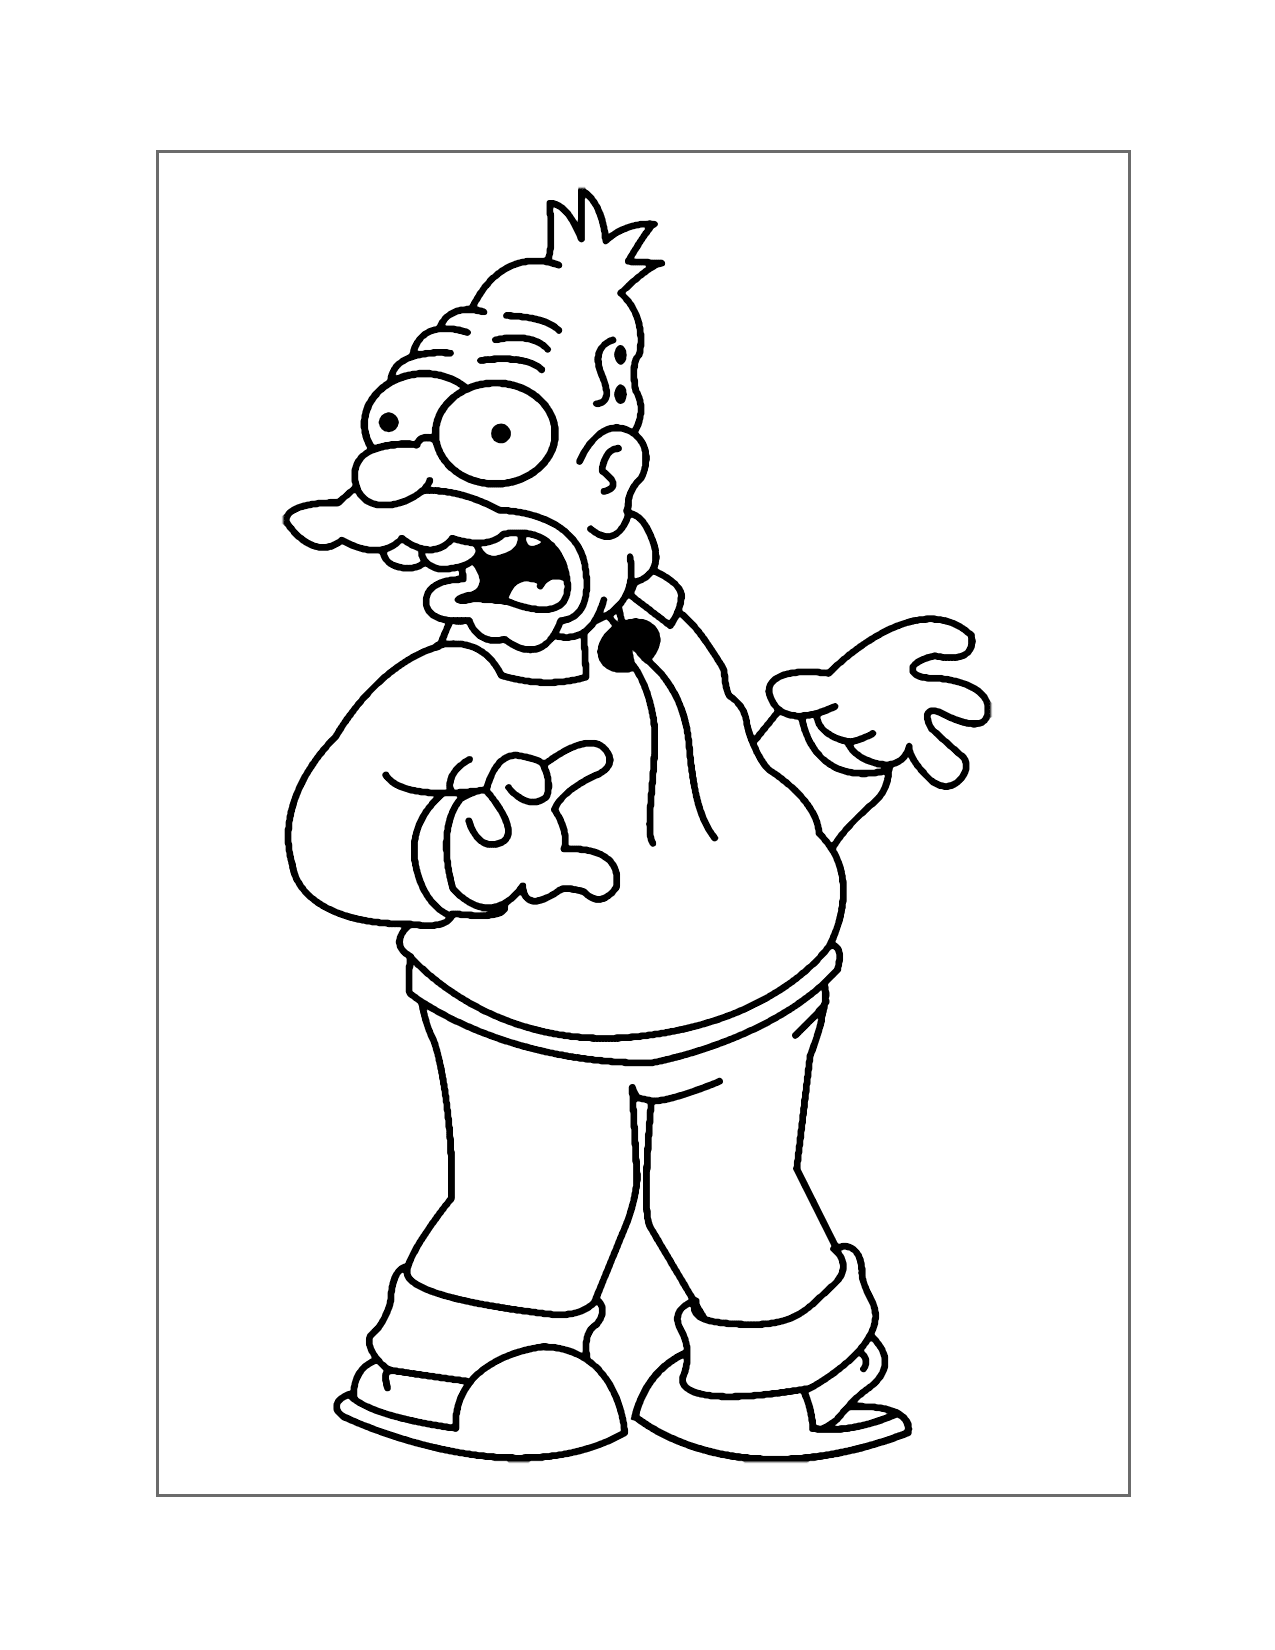 Grampa Abe Simpson Coloring Page